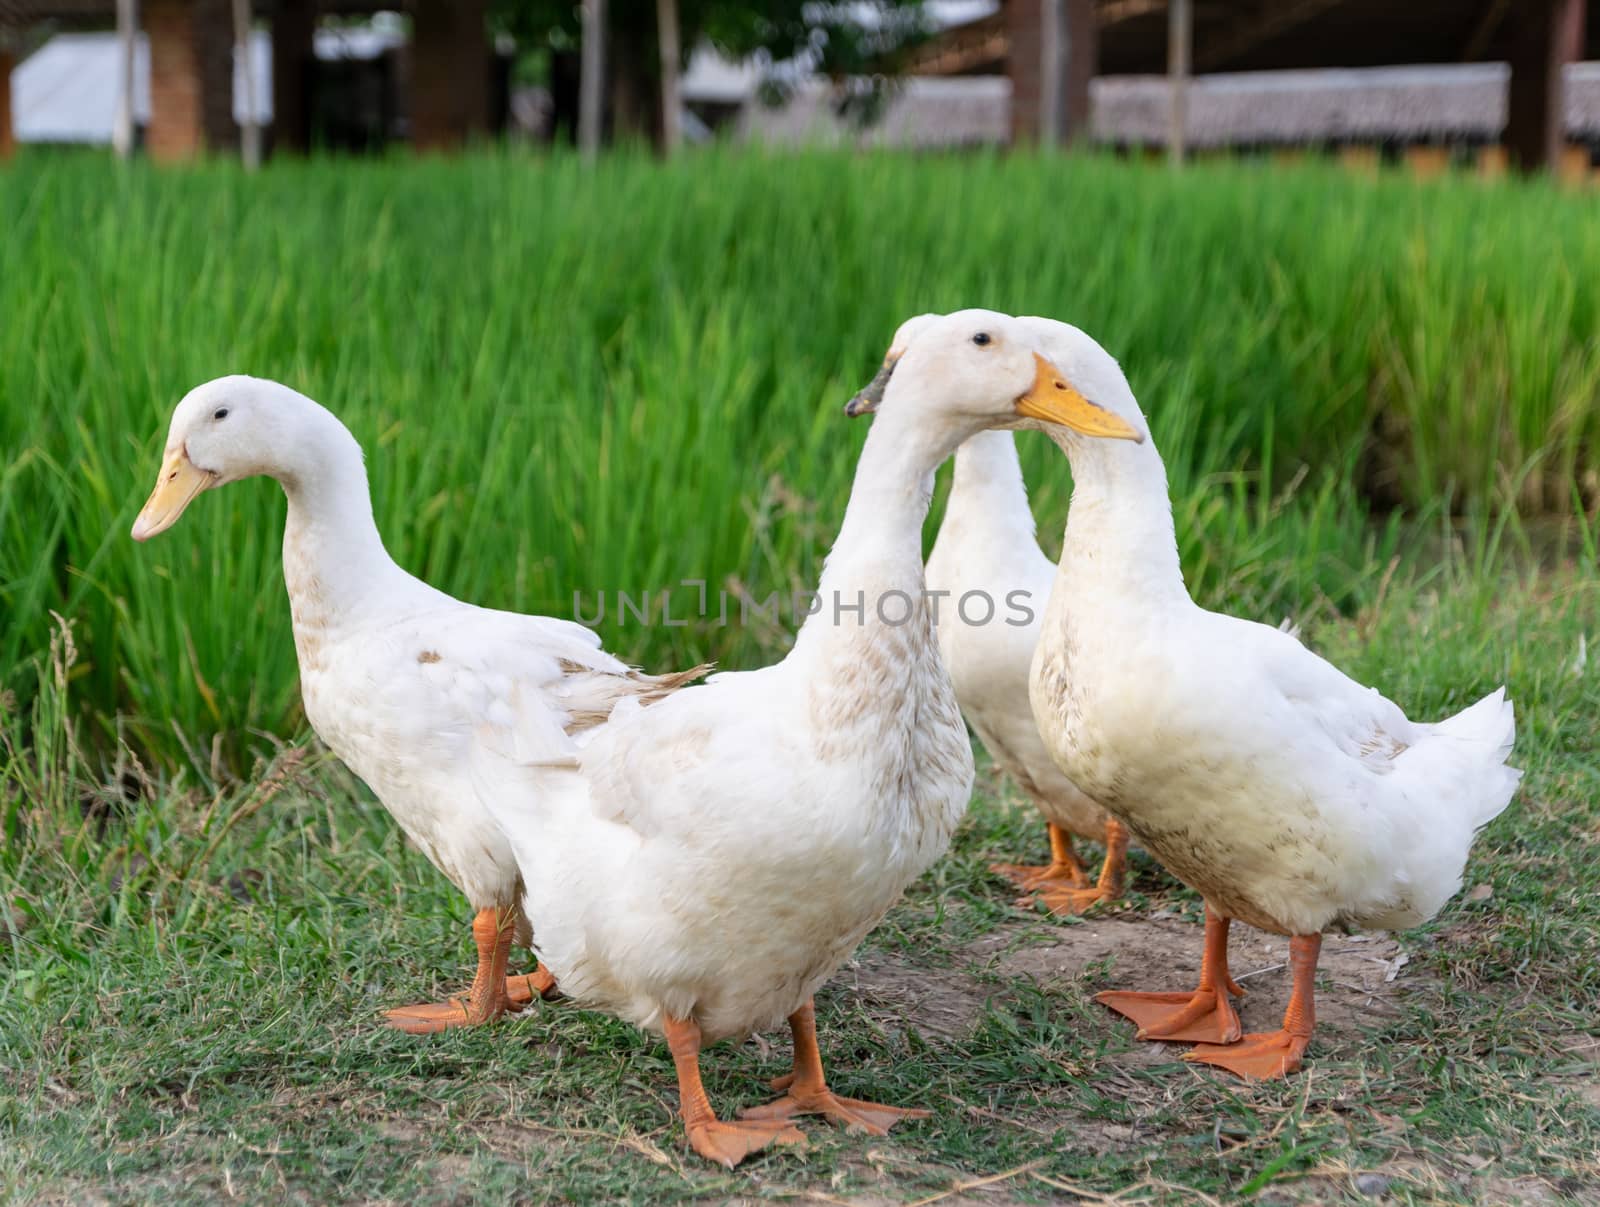 ducks many white a rice field background